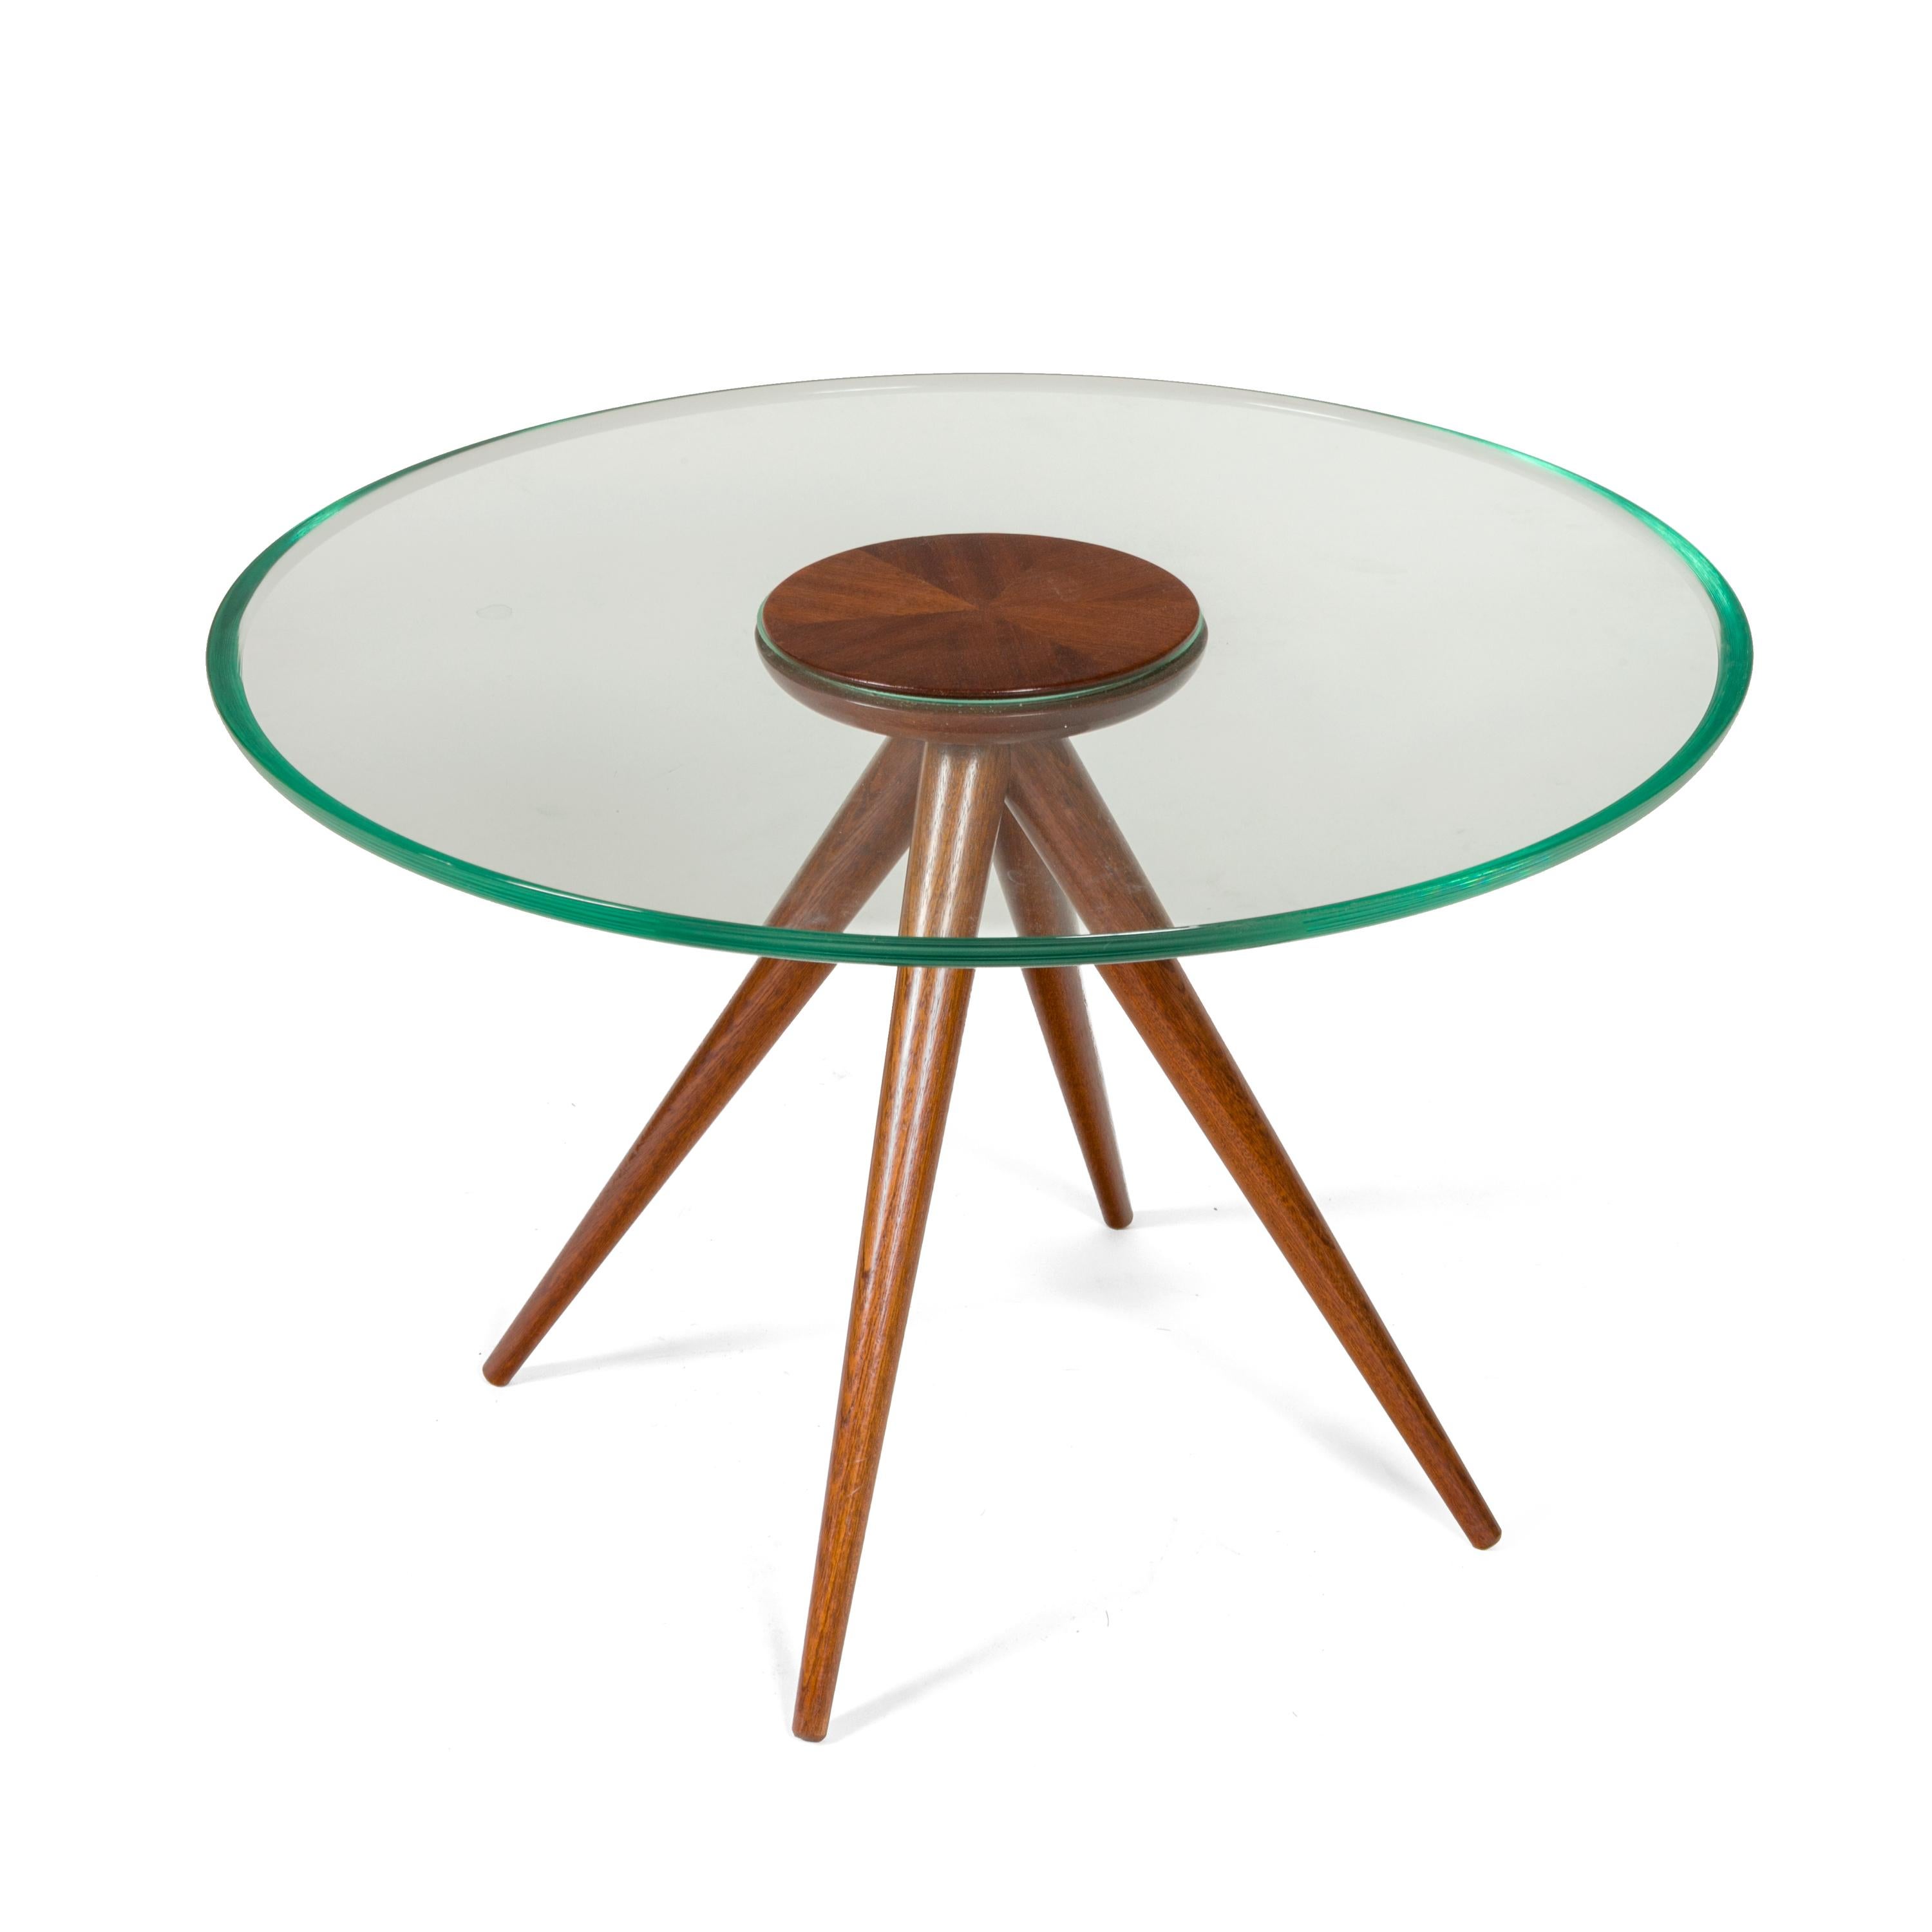 An elegant table in the style of one of the great midcentury Italian designers who worked for Fontana Arte in the 1950s.